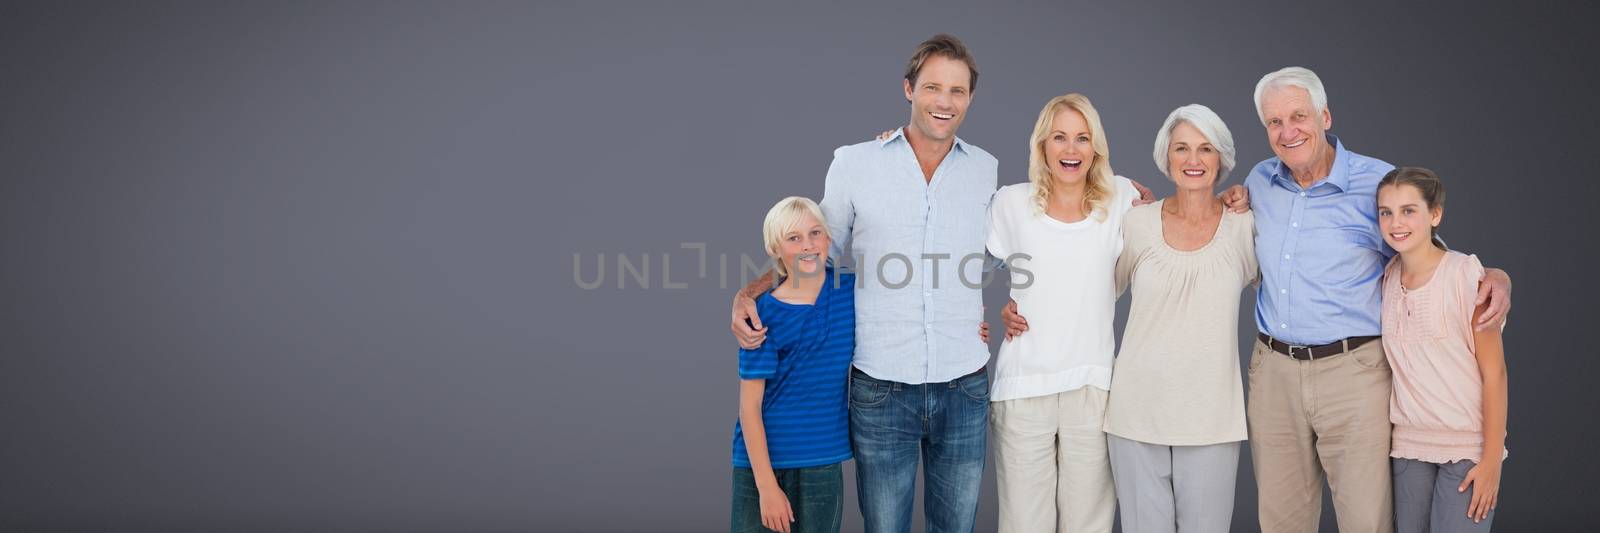 Digital composite of Family generations together with grey background